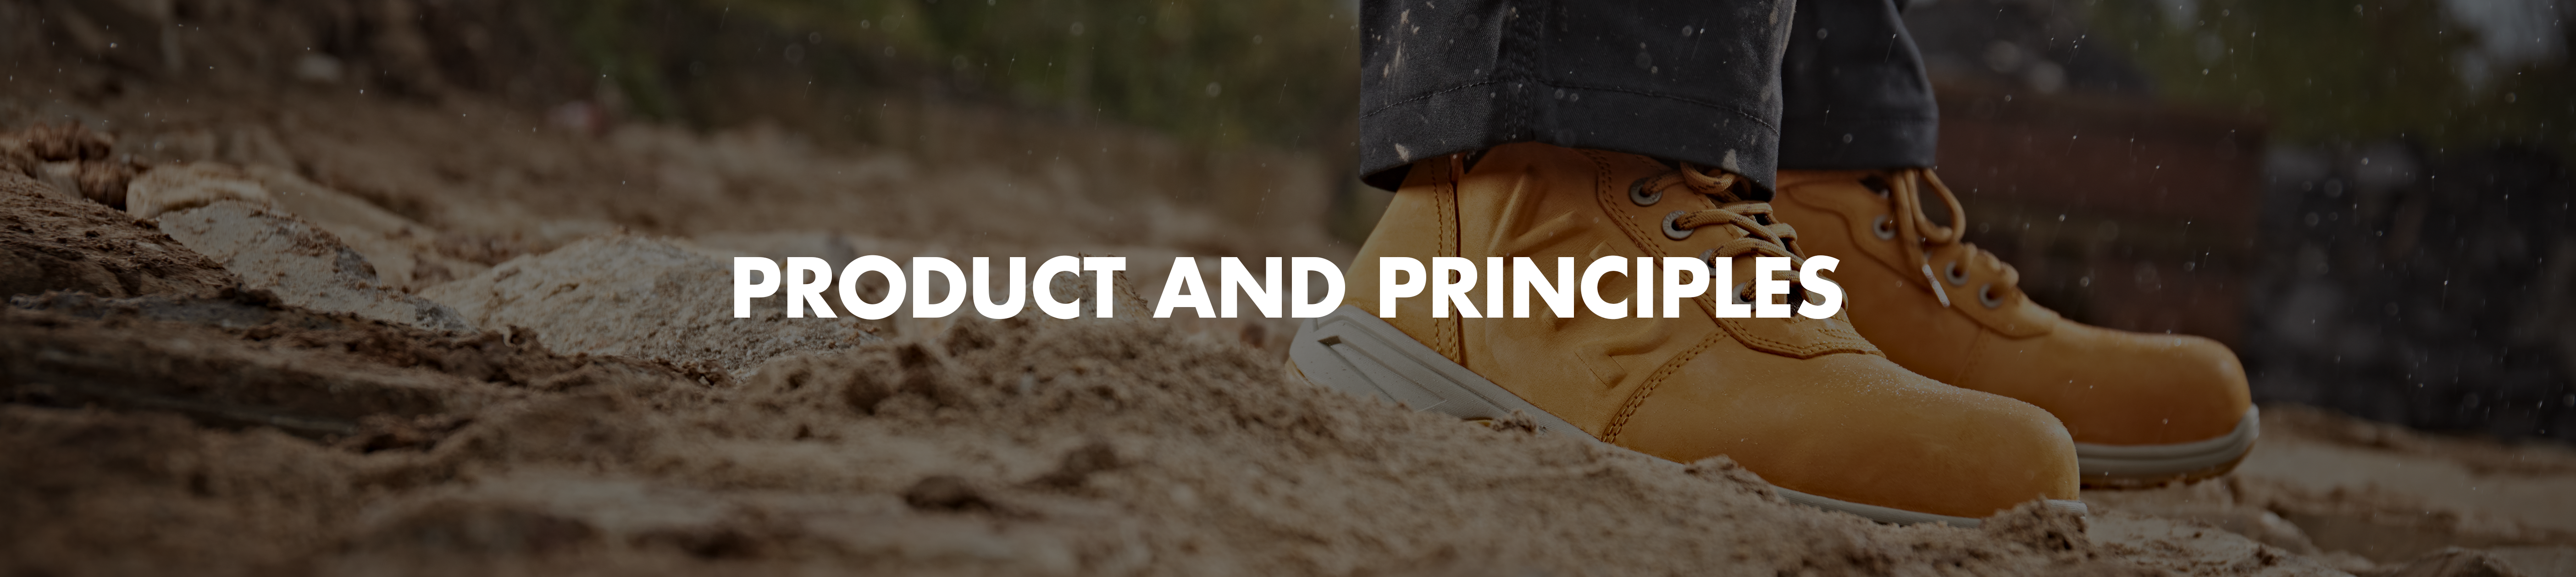 Product and Principles